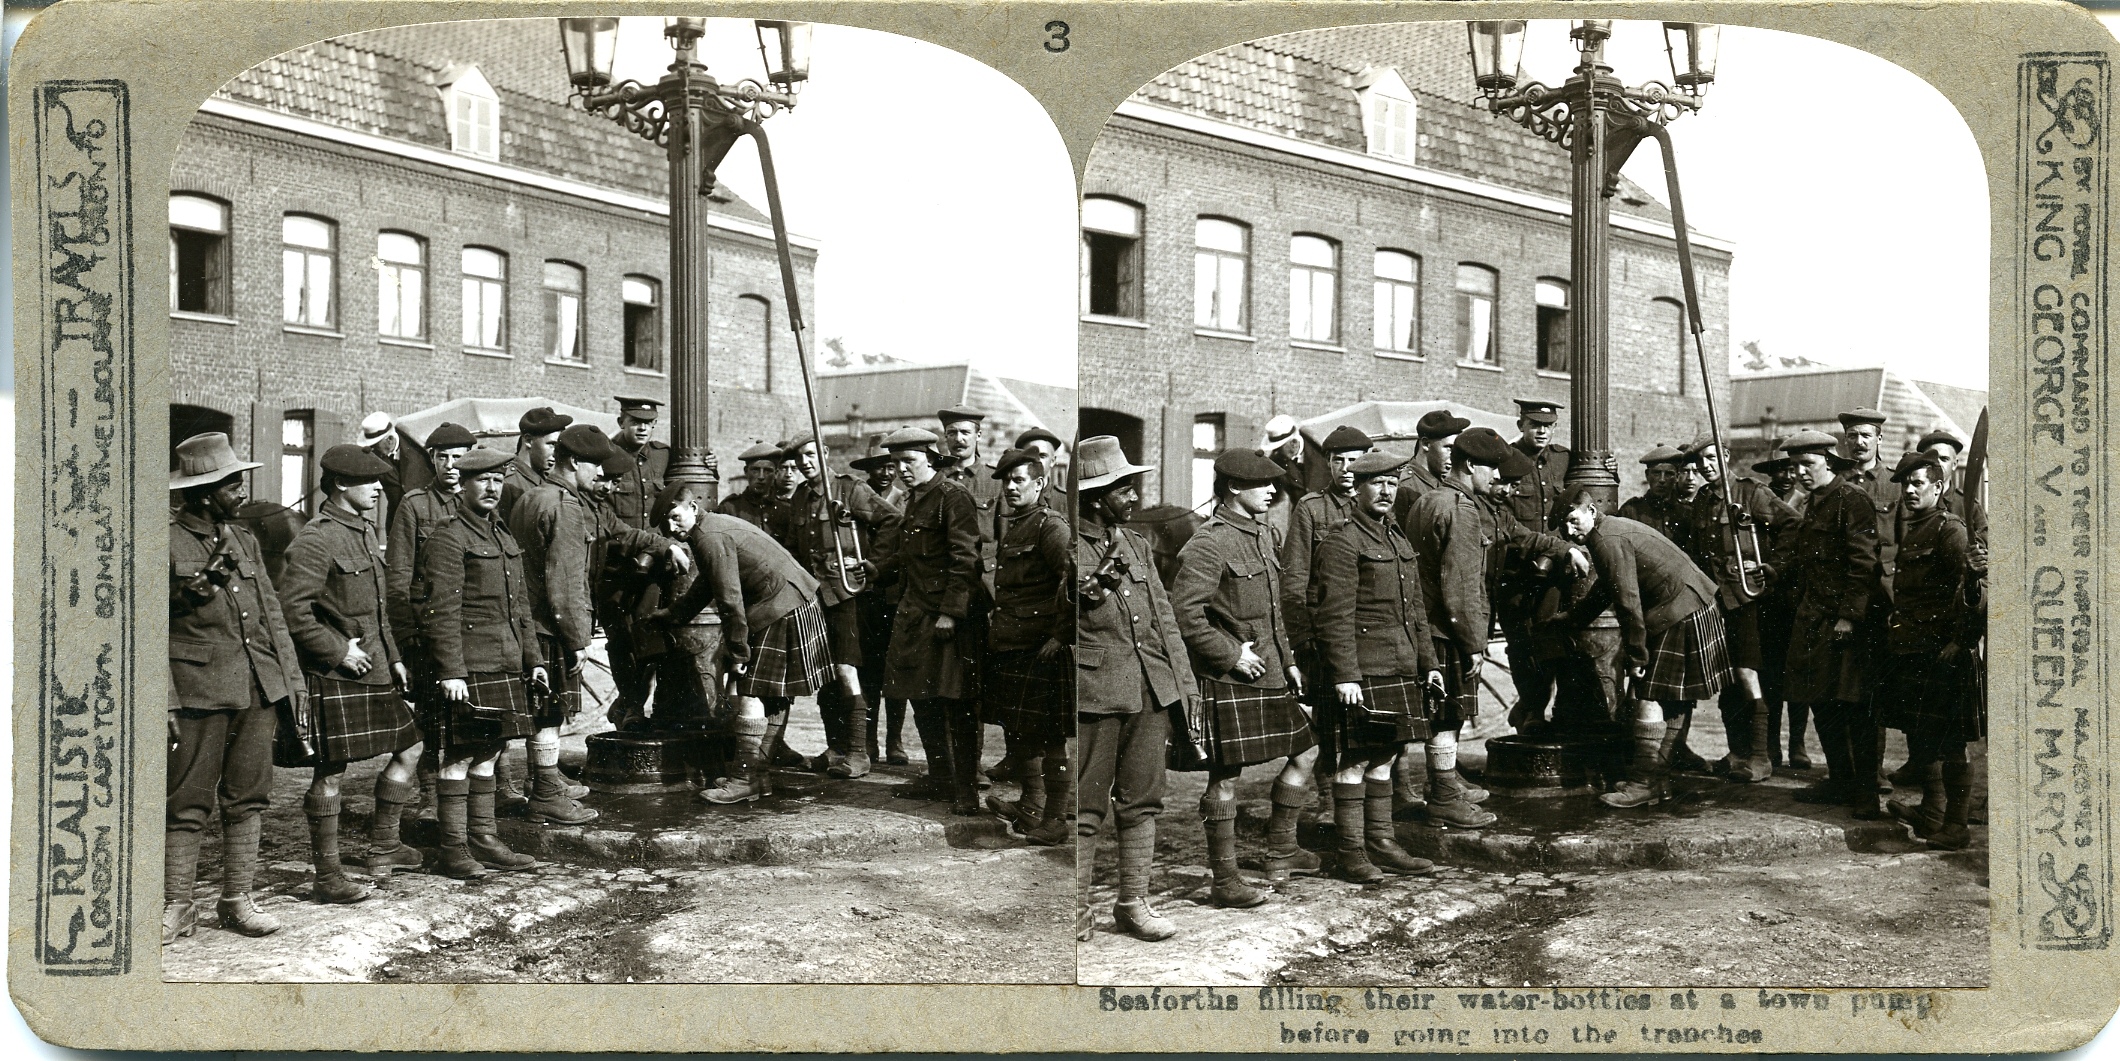 Seaforths fill their water bottles at the town pump La Gorgue, before going into the trenches